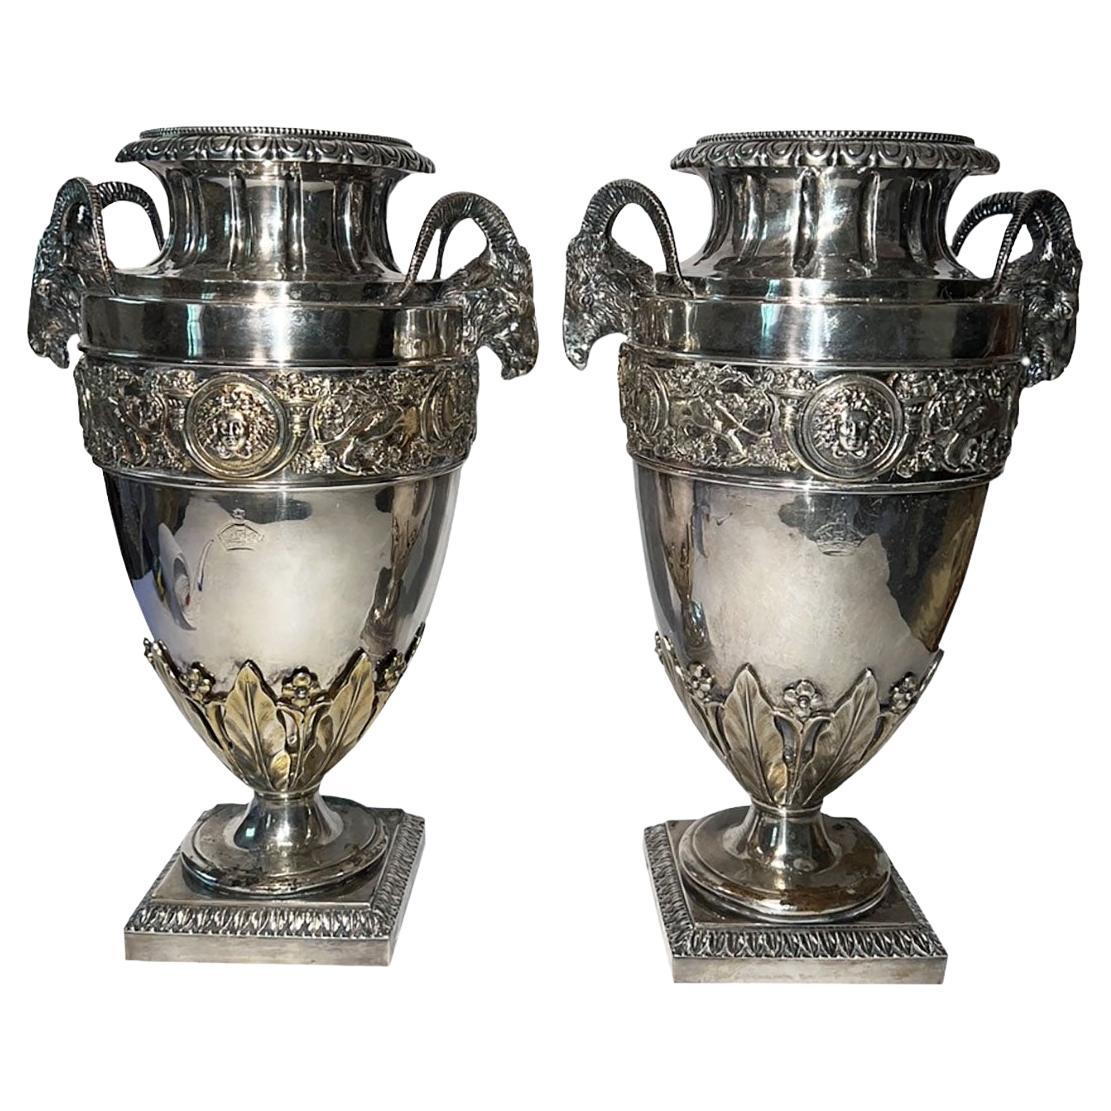 English Sheffield Silver Plate, Urns With Rams Heads And Faces 